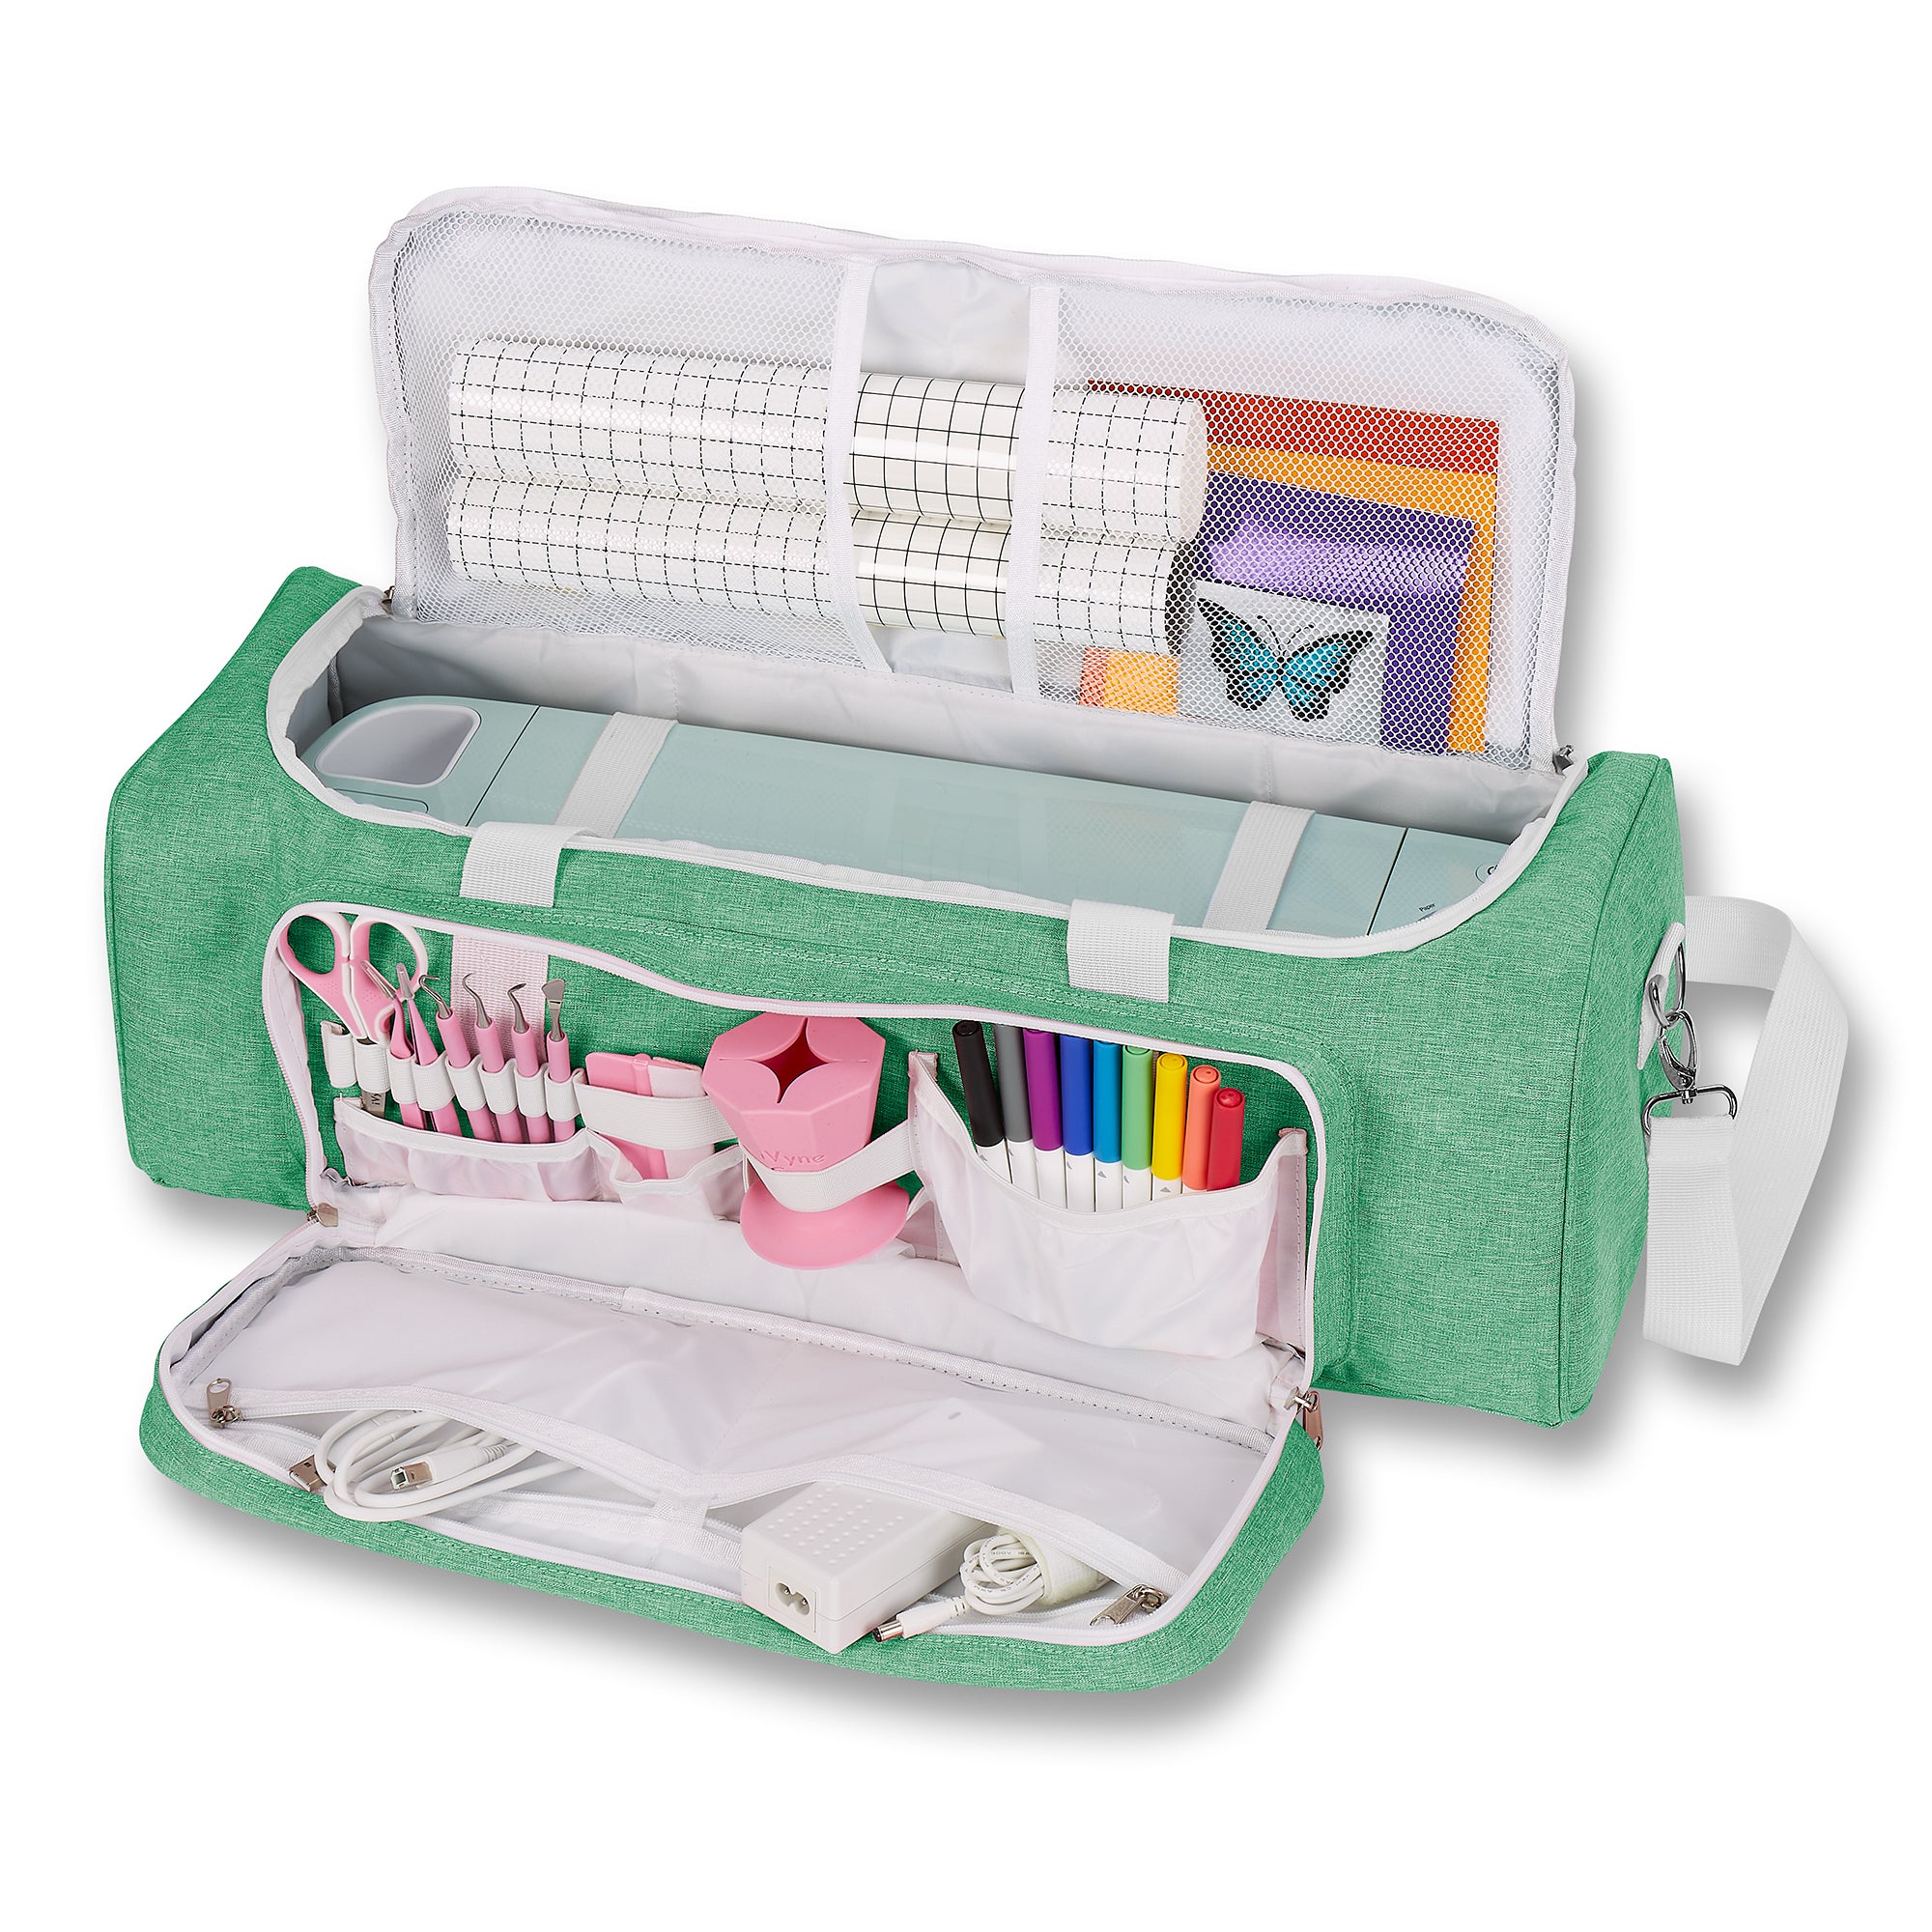 iVyne Case for Carrying Cricut Explore Air 2, Cricut Maker, Cricut Explore 3 & Cricut Maker 3